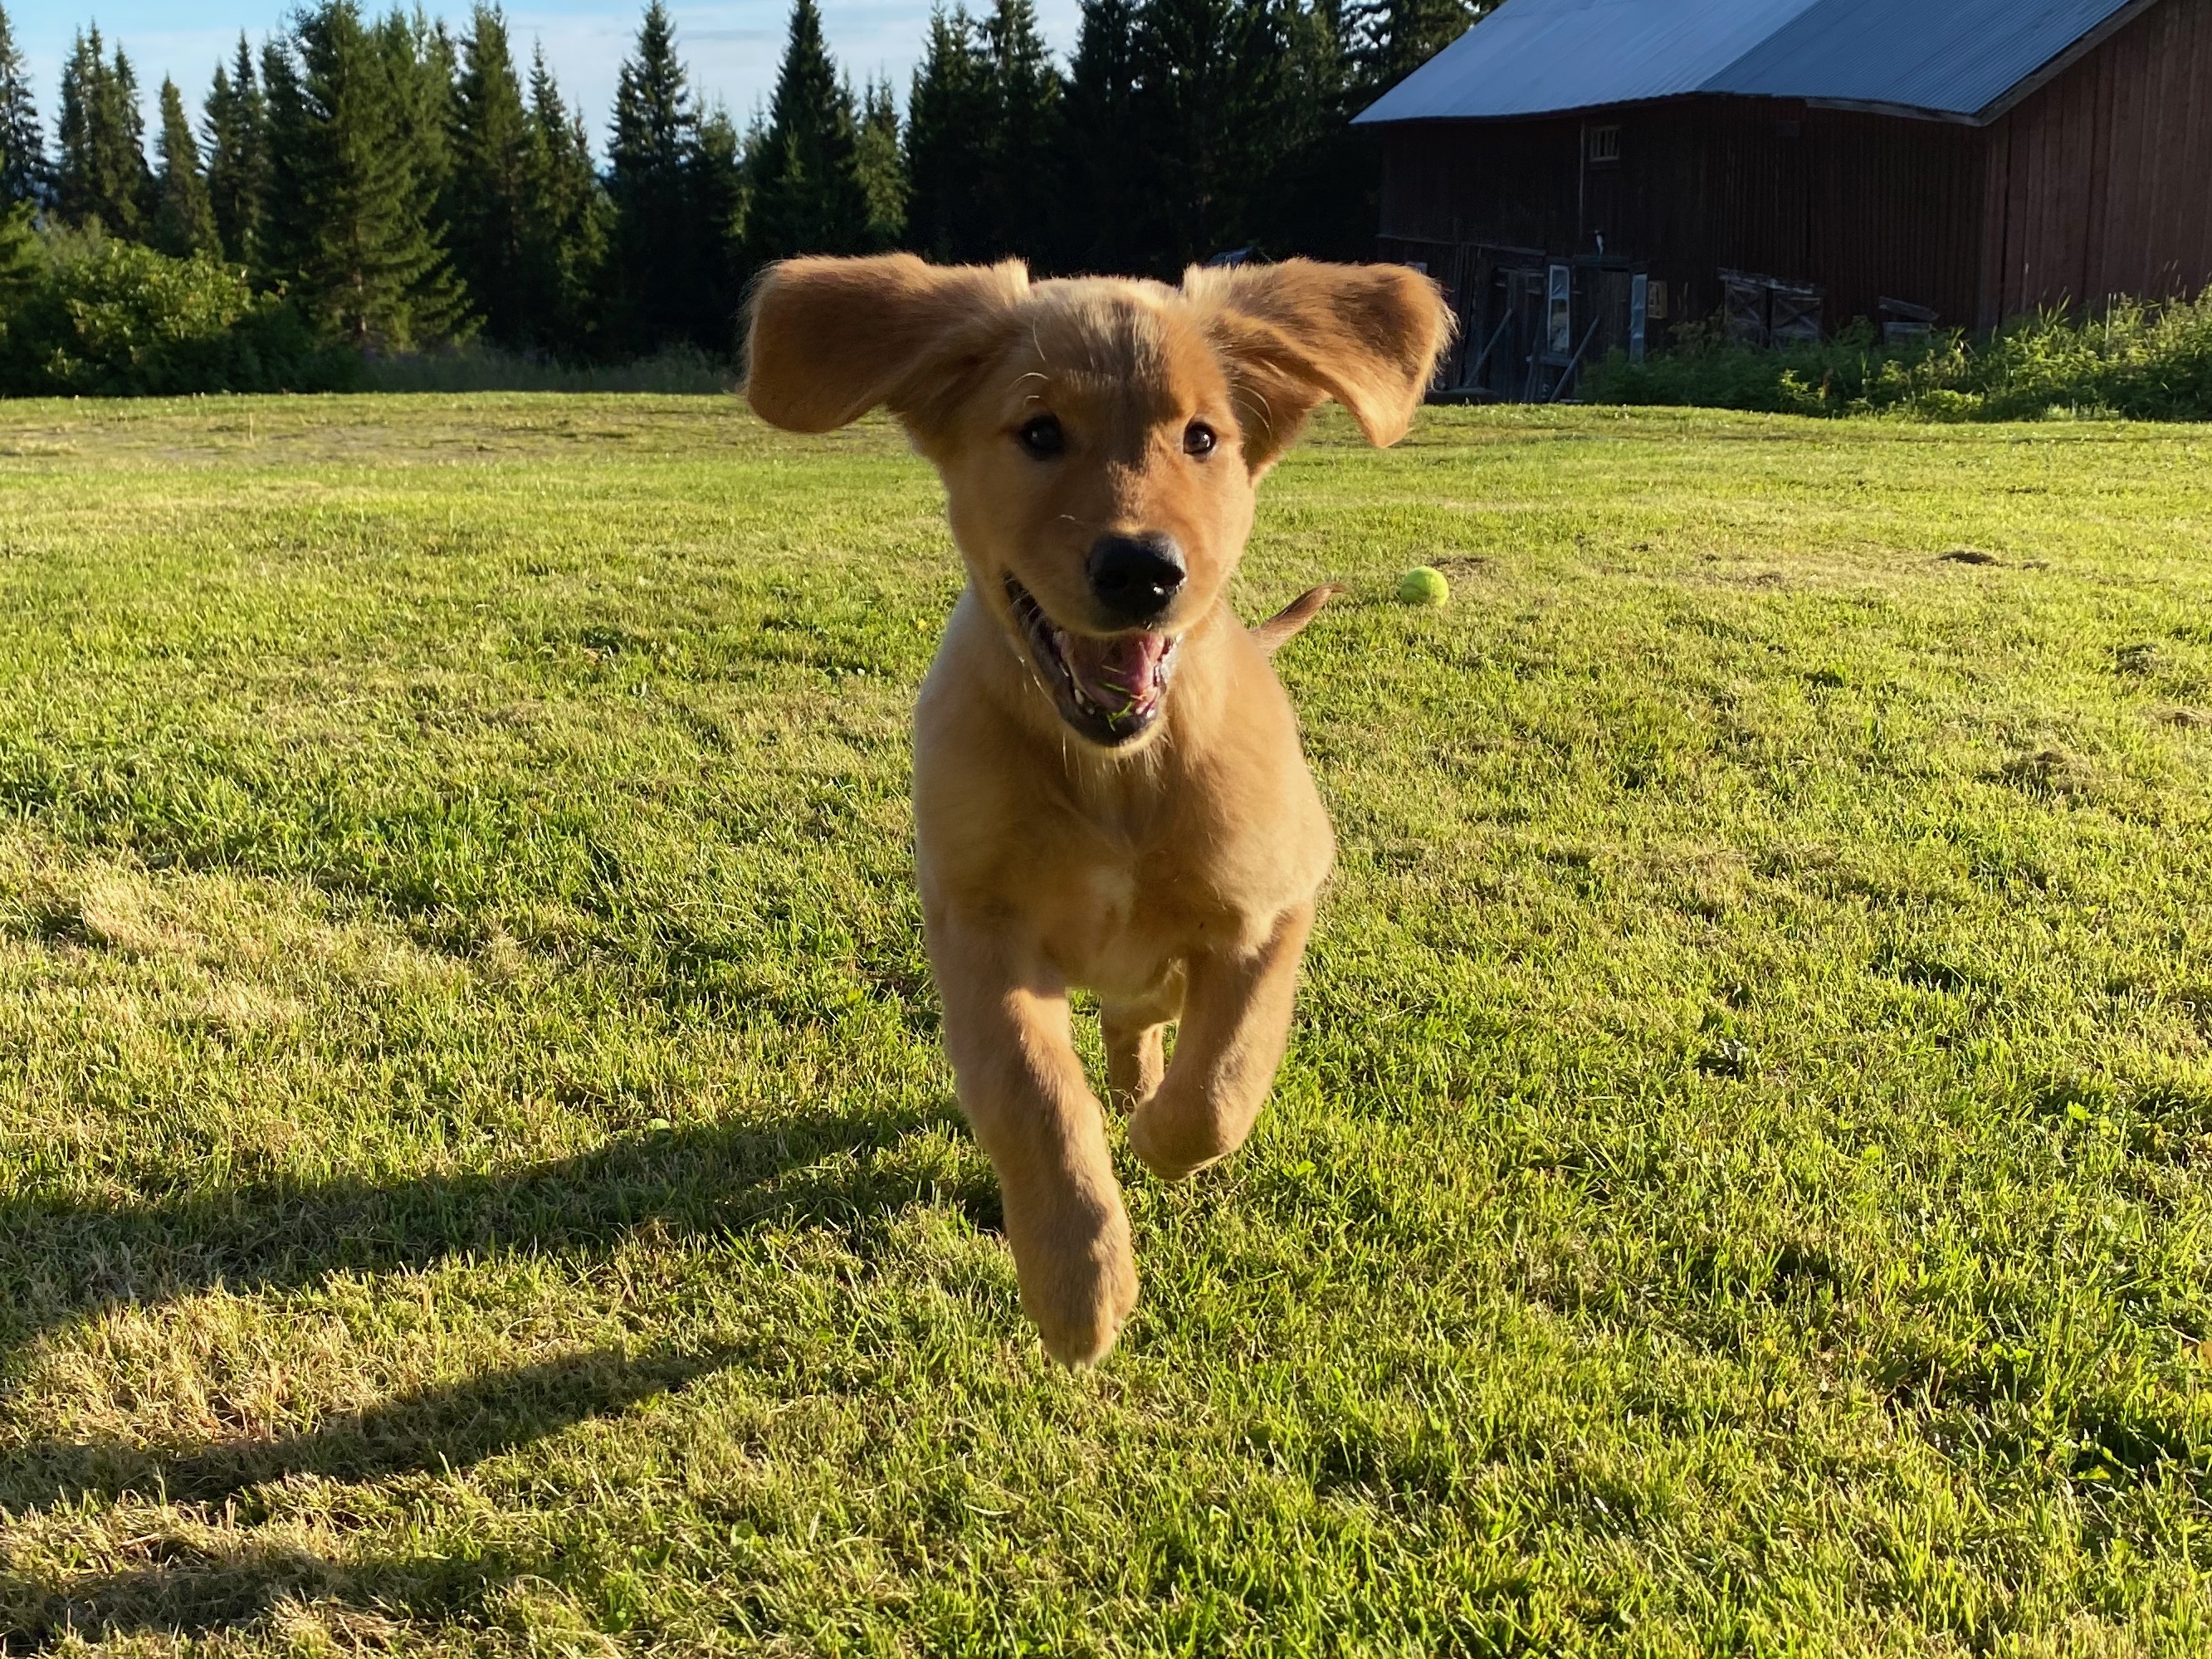 Golden Retriever puppy jumping on the grass, ears flapping like wings